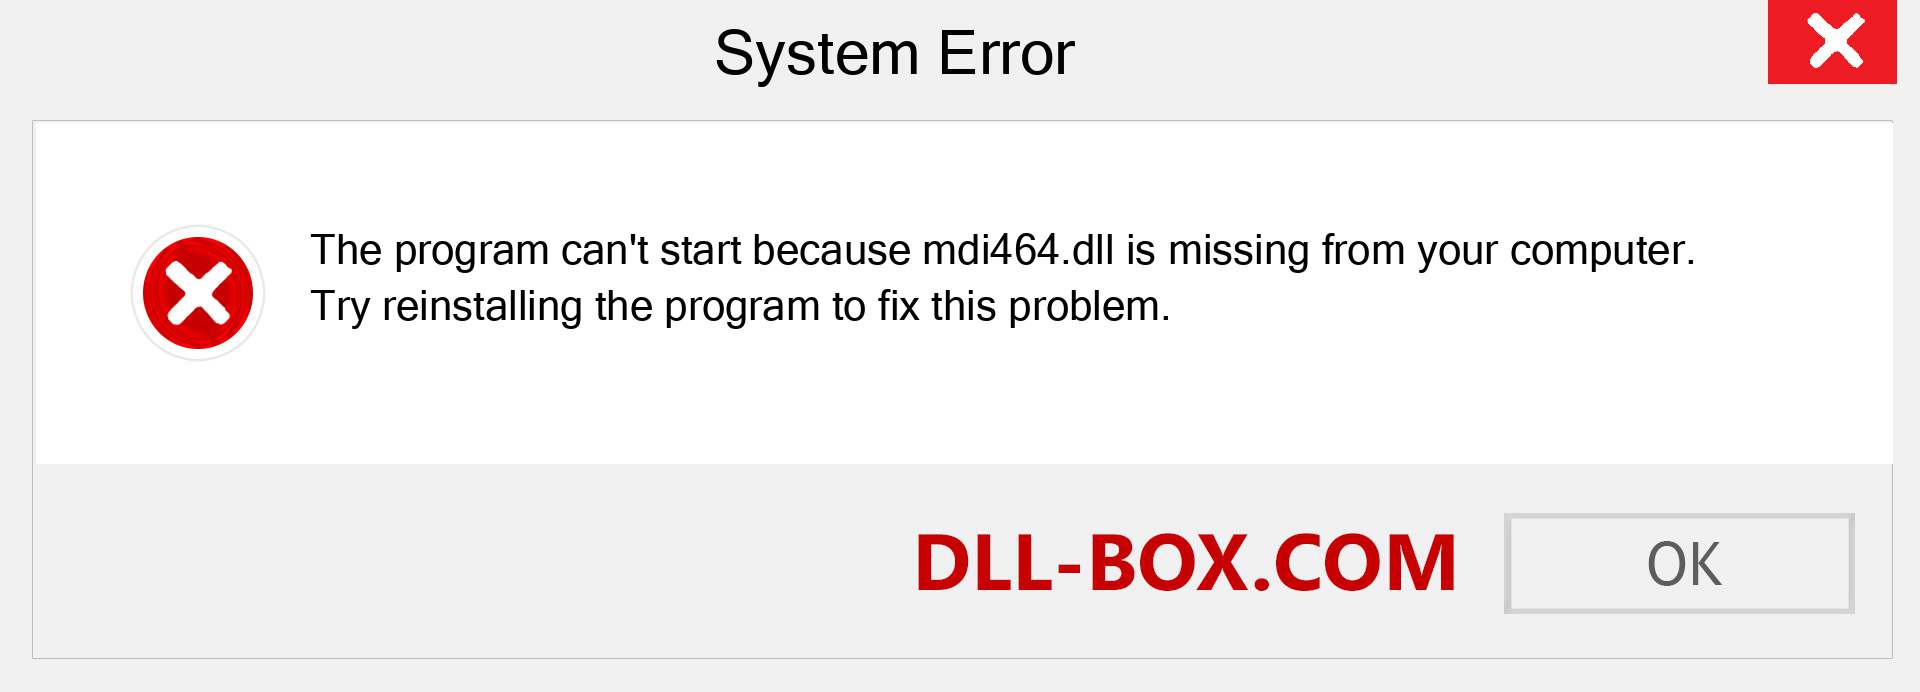  mdi464.dll file is missing?. Download for Windows 7, 8, 10 - Fix  mdi464 dll Missing Error on Windows, photos, images